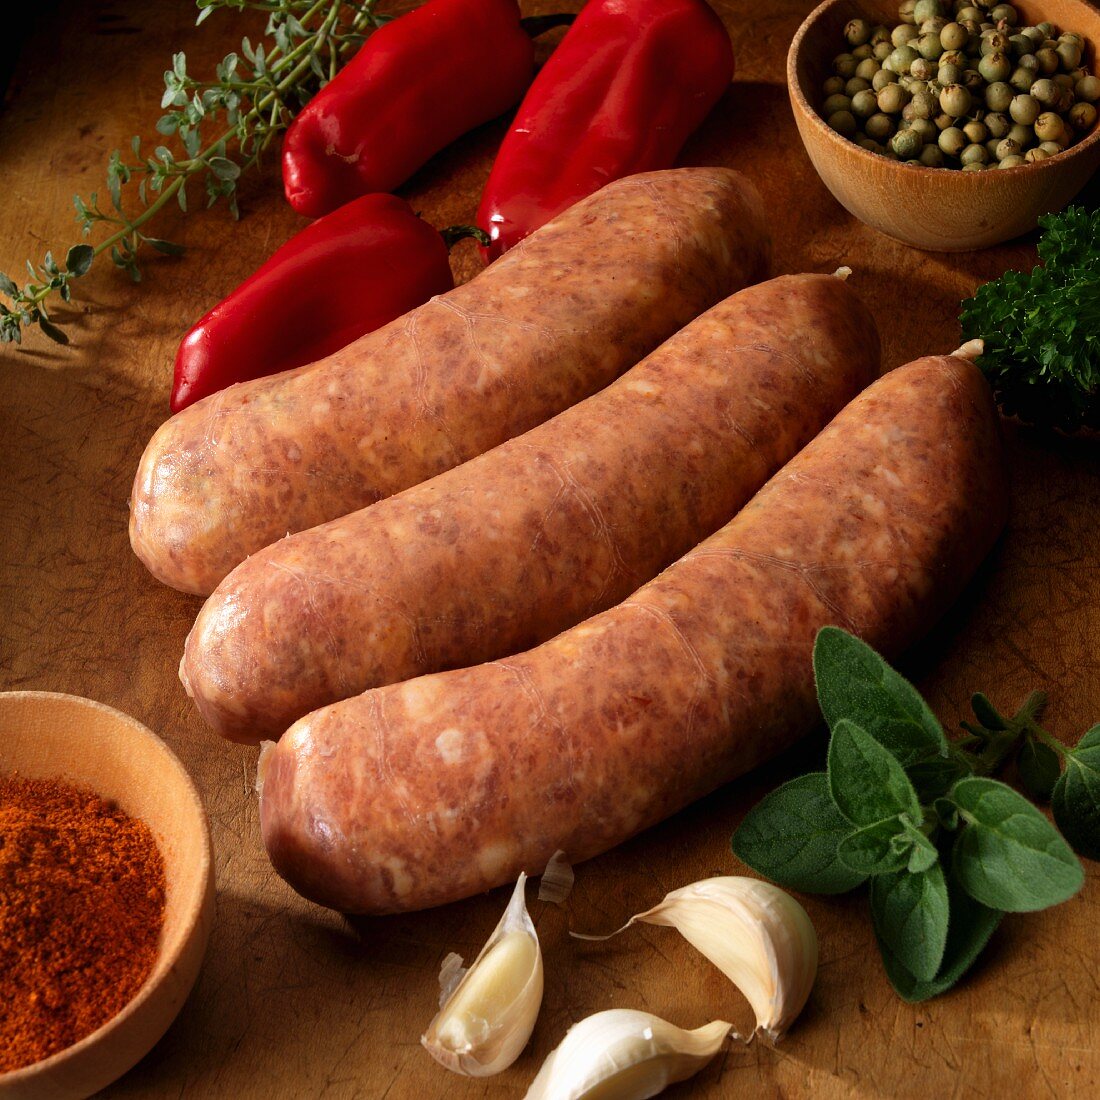 Spicy pork sausage with peppers, garlic, herbs and spices